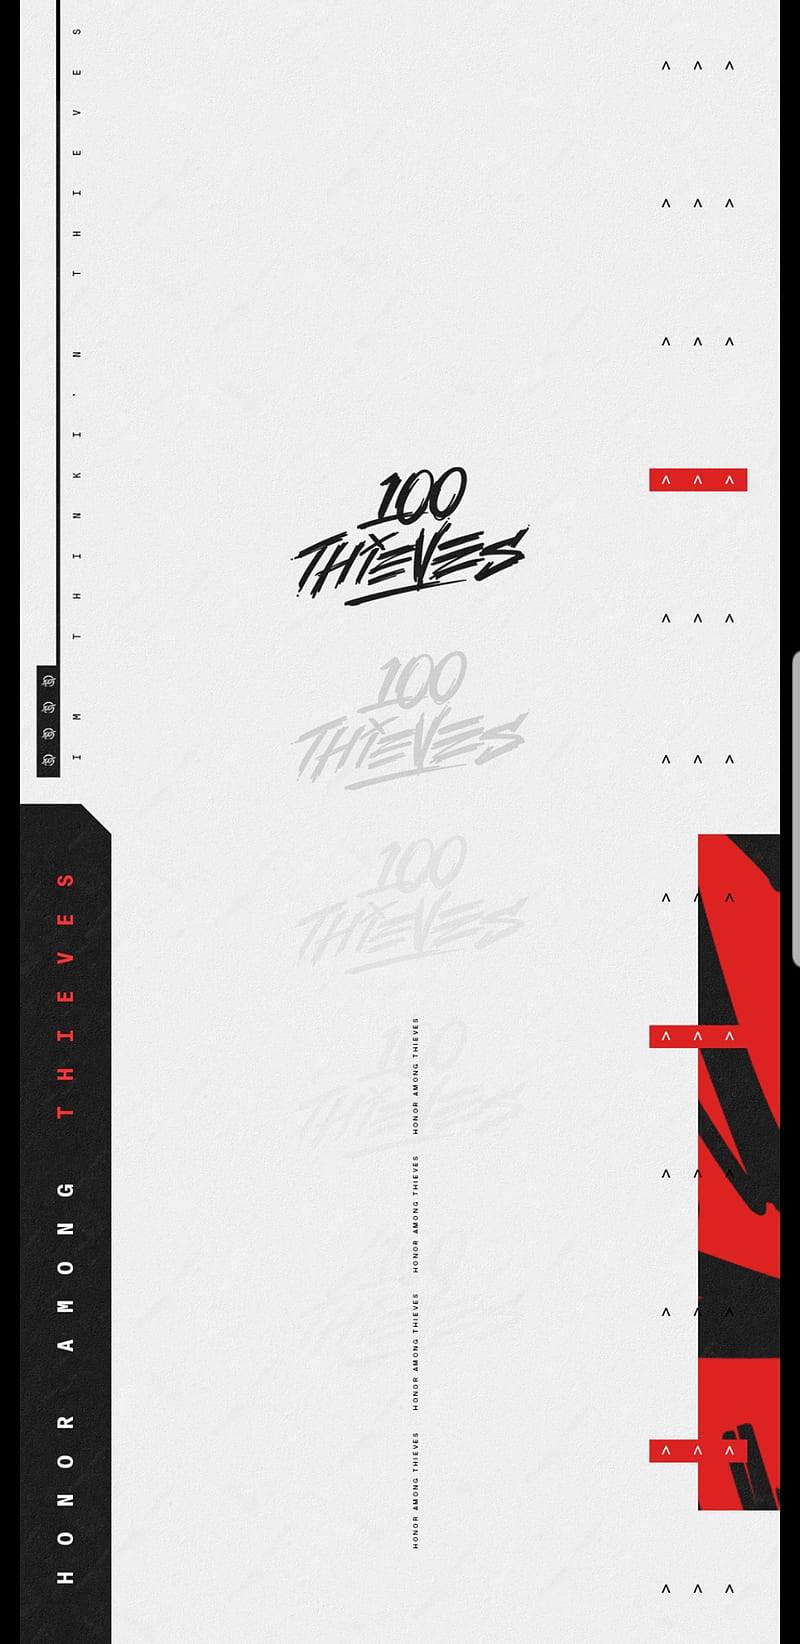 Details more than 78 100 thieves wallpaper - in.coedo.com.vn